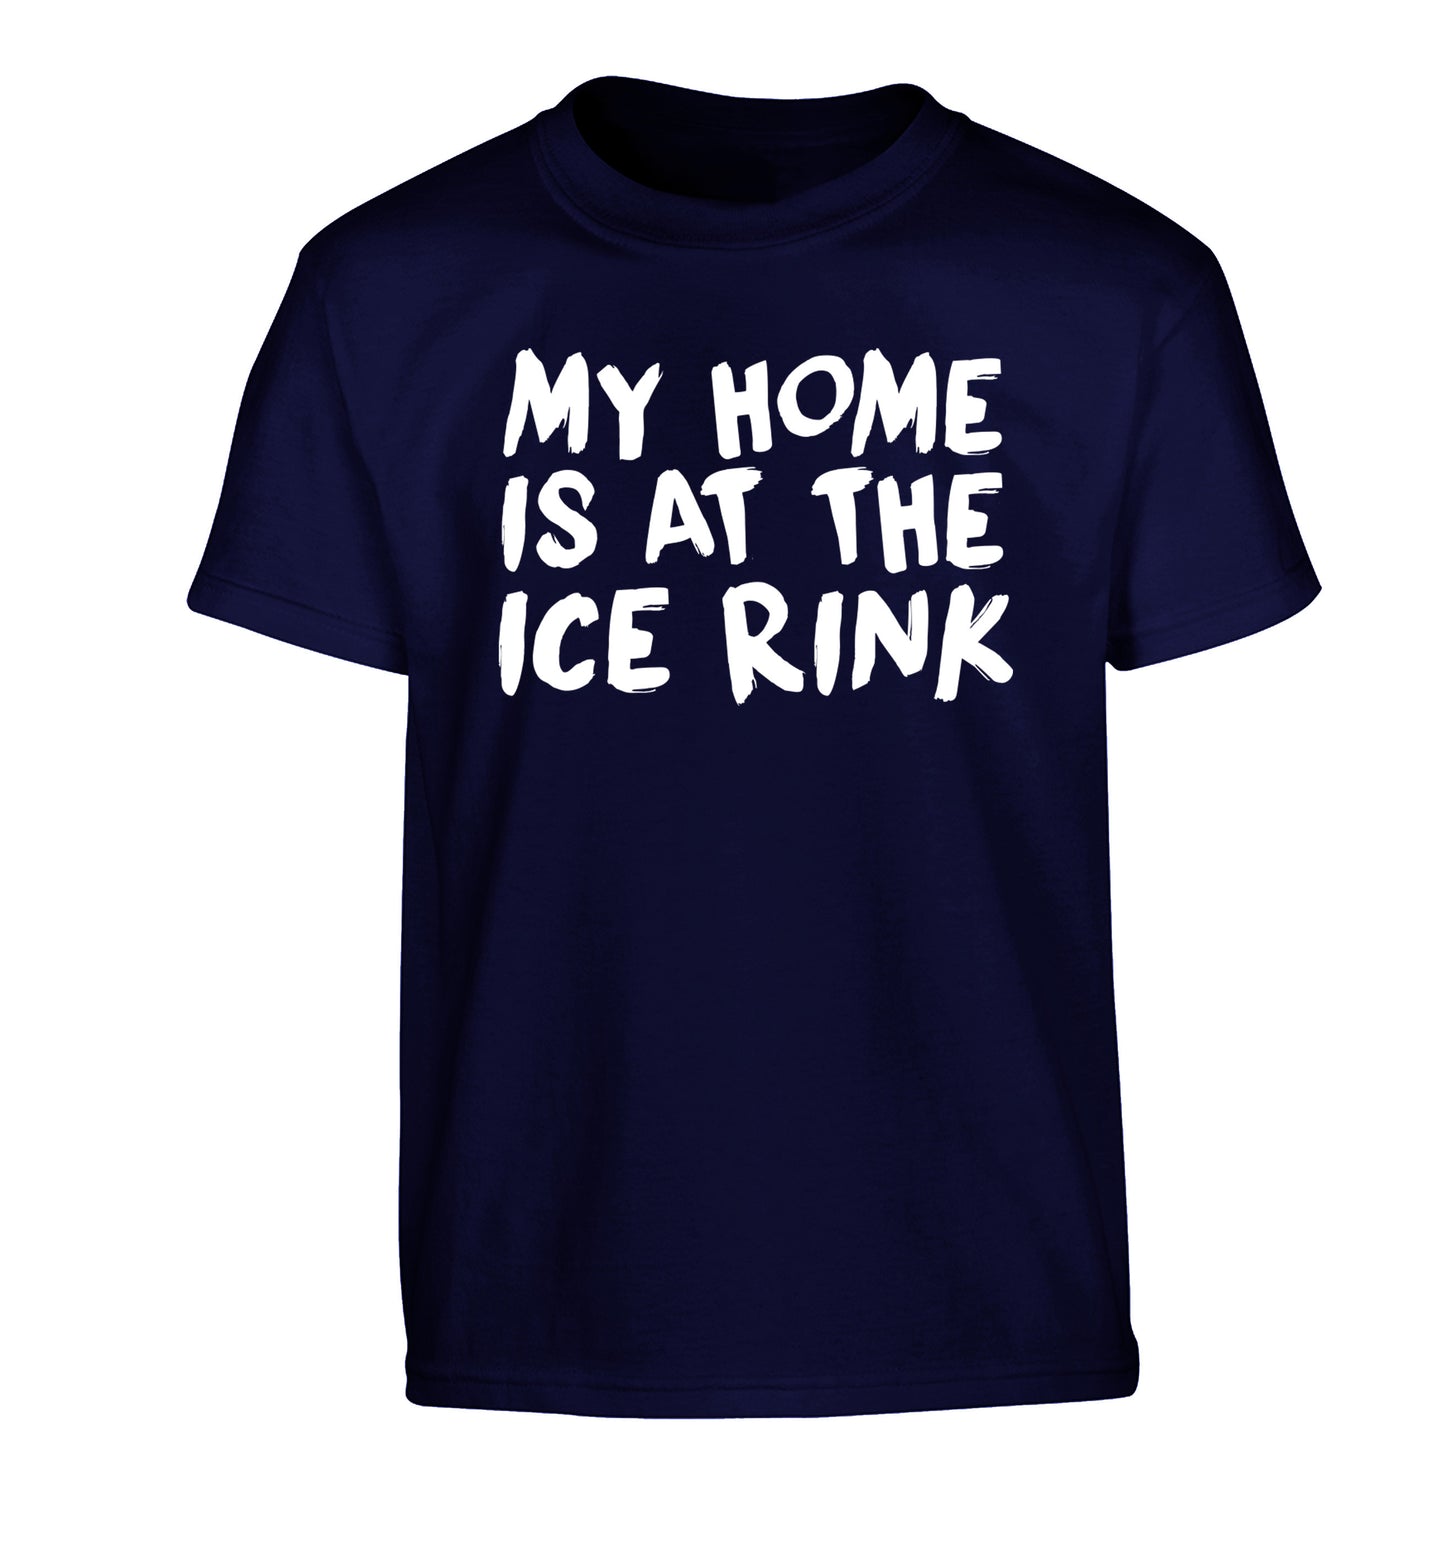 My home is at the ice rink Children's navy Tshirt 12-14 Years